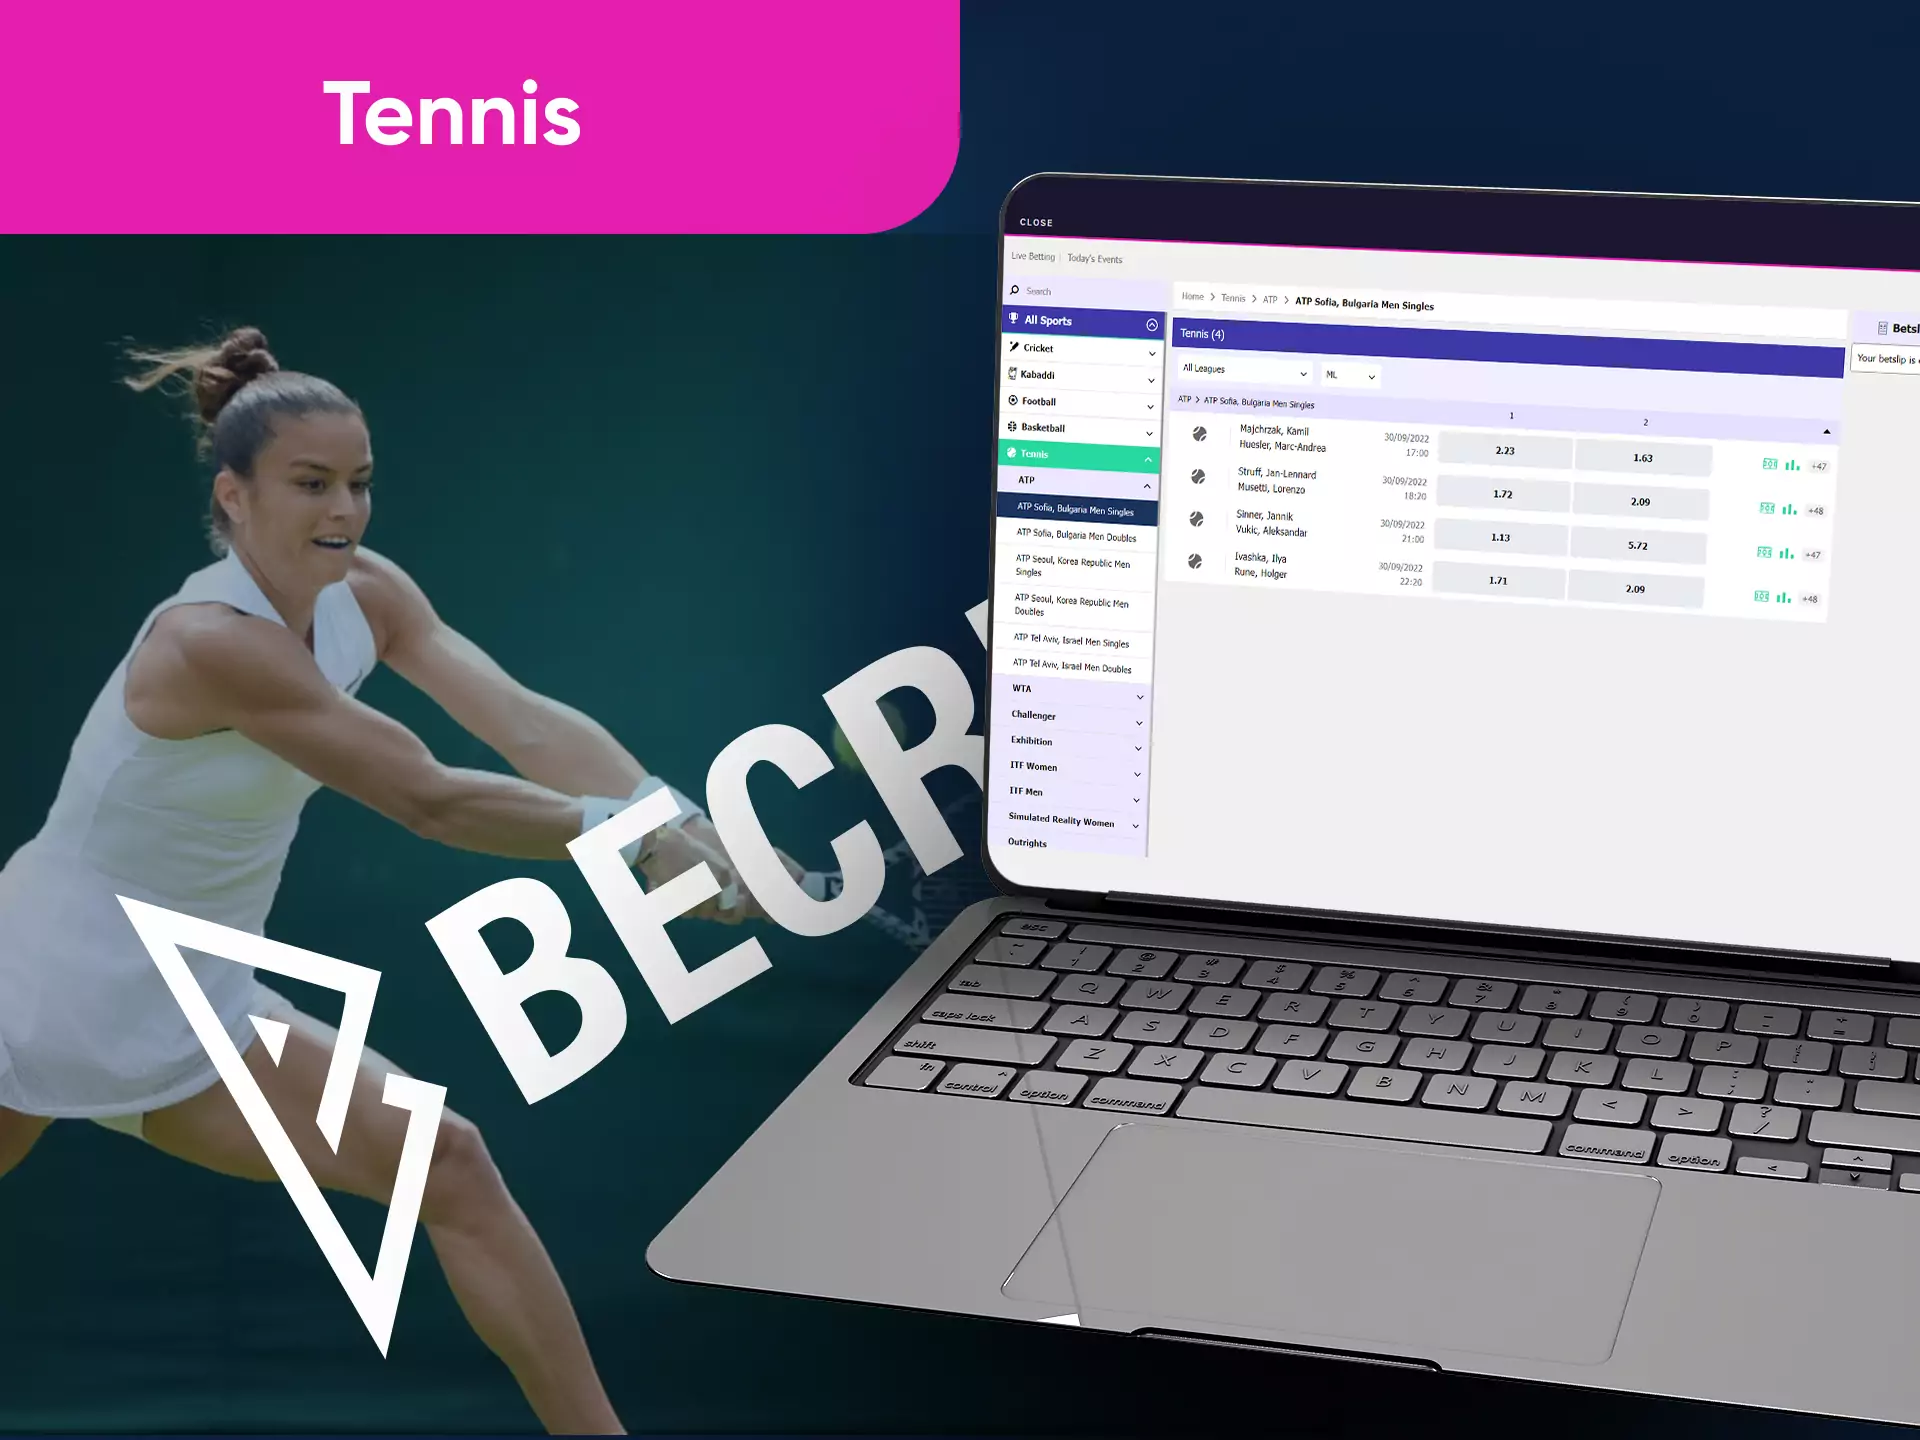 In the Becric sportsbook, users often place bets on tennis championships.